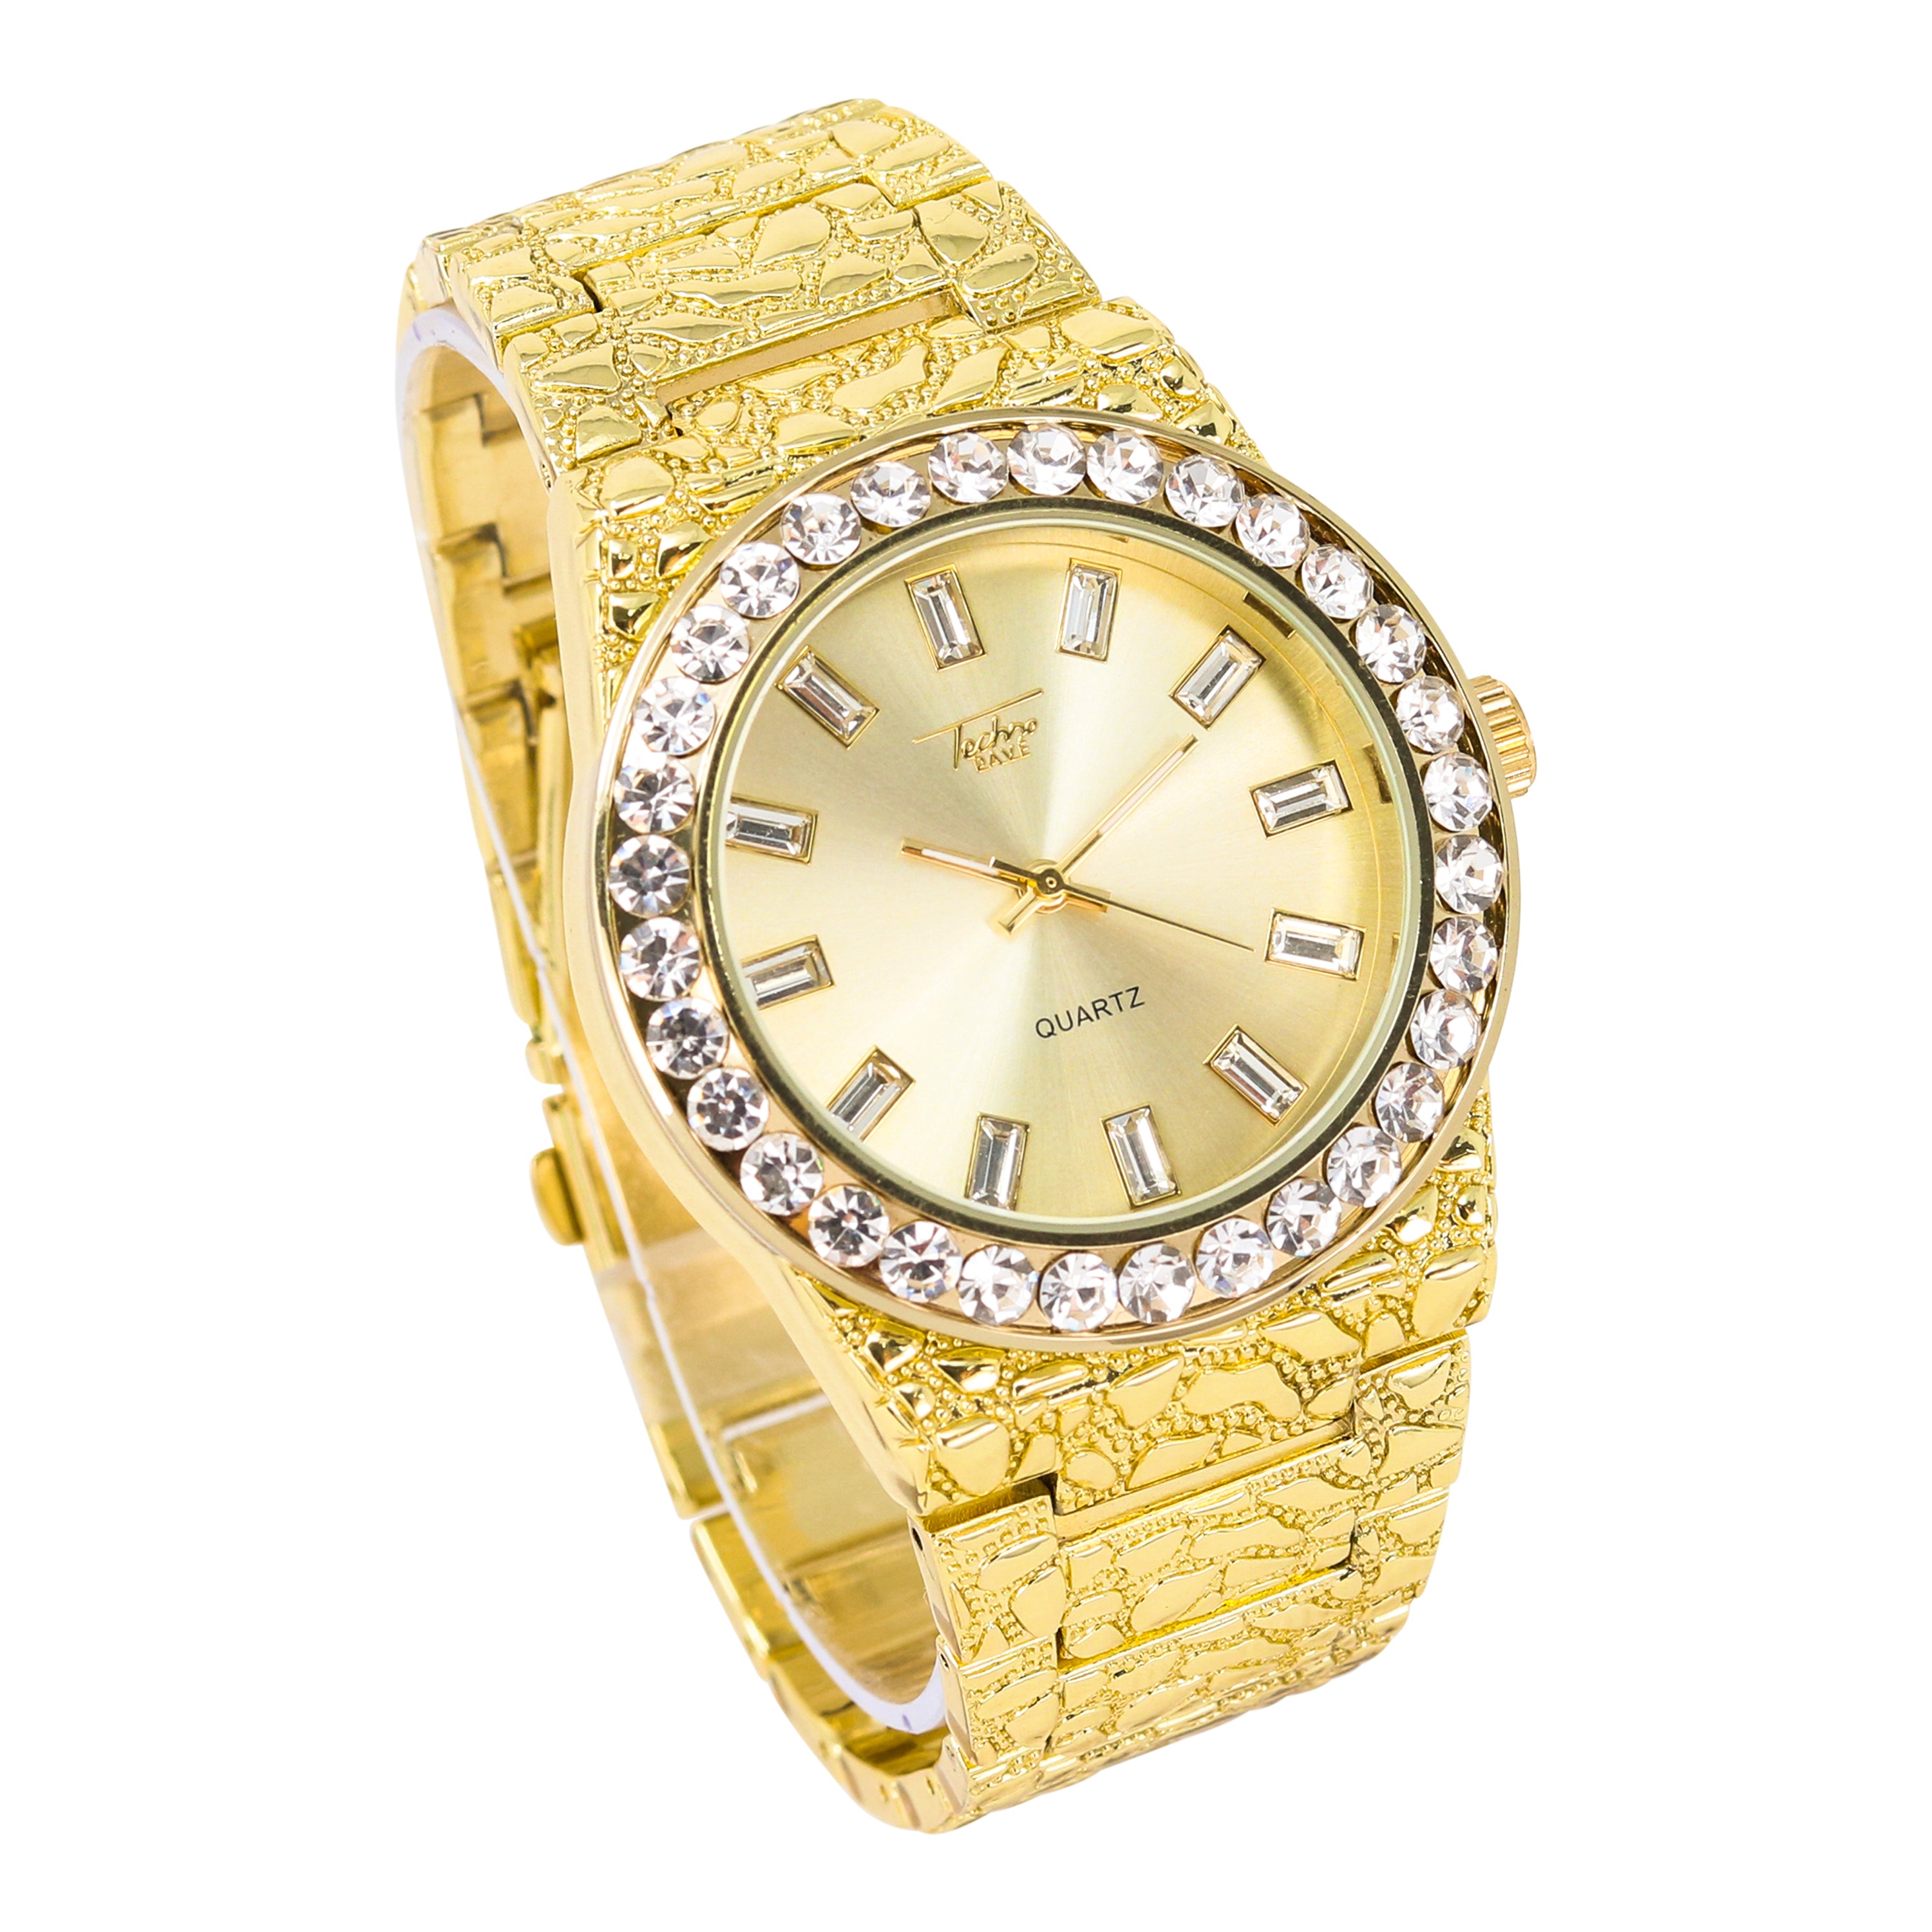 Men's Round Iced Out Watch 43mm Gold - Nugget Band